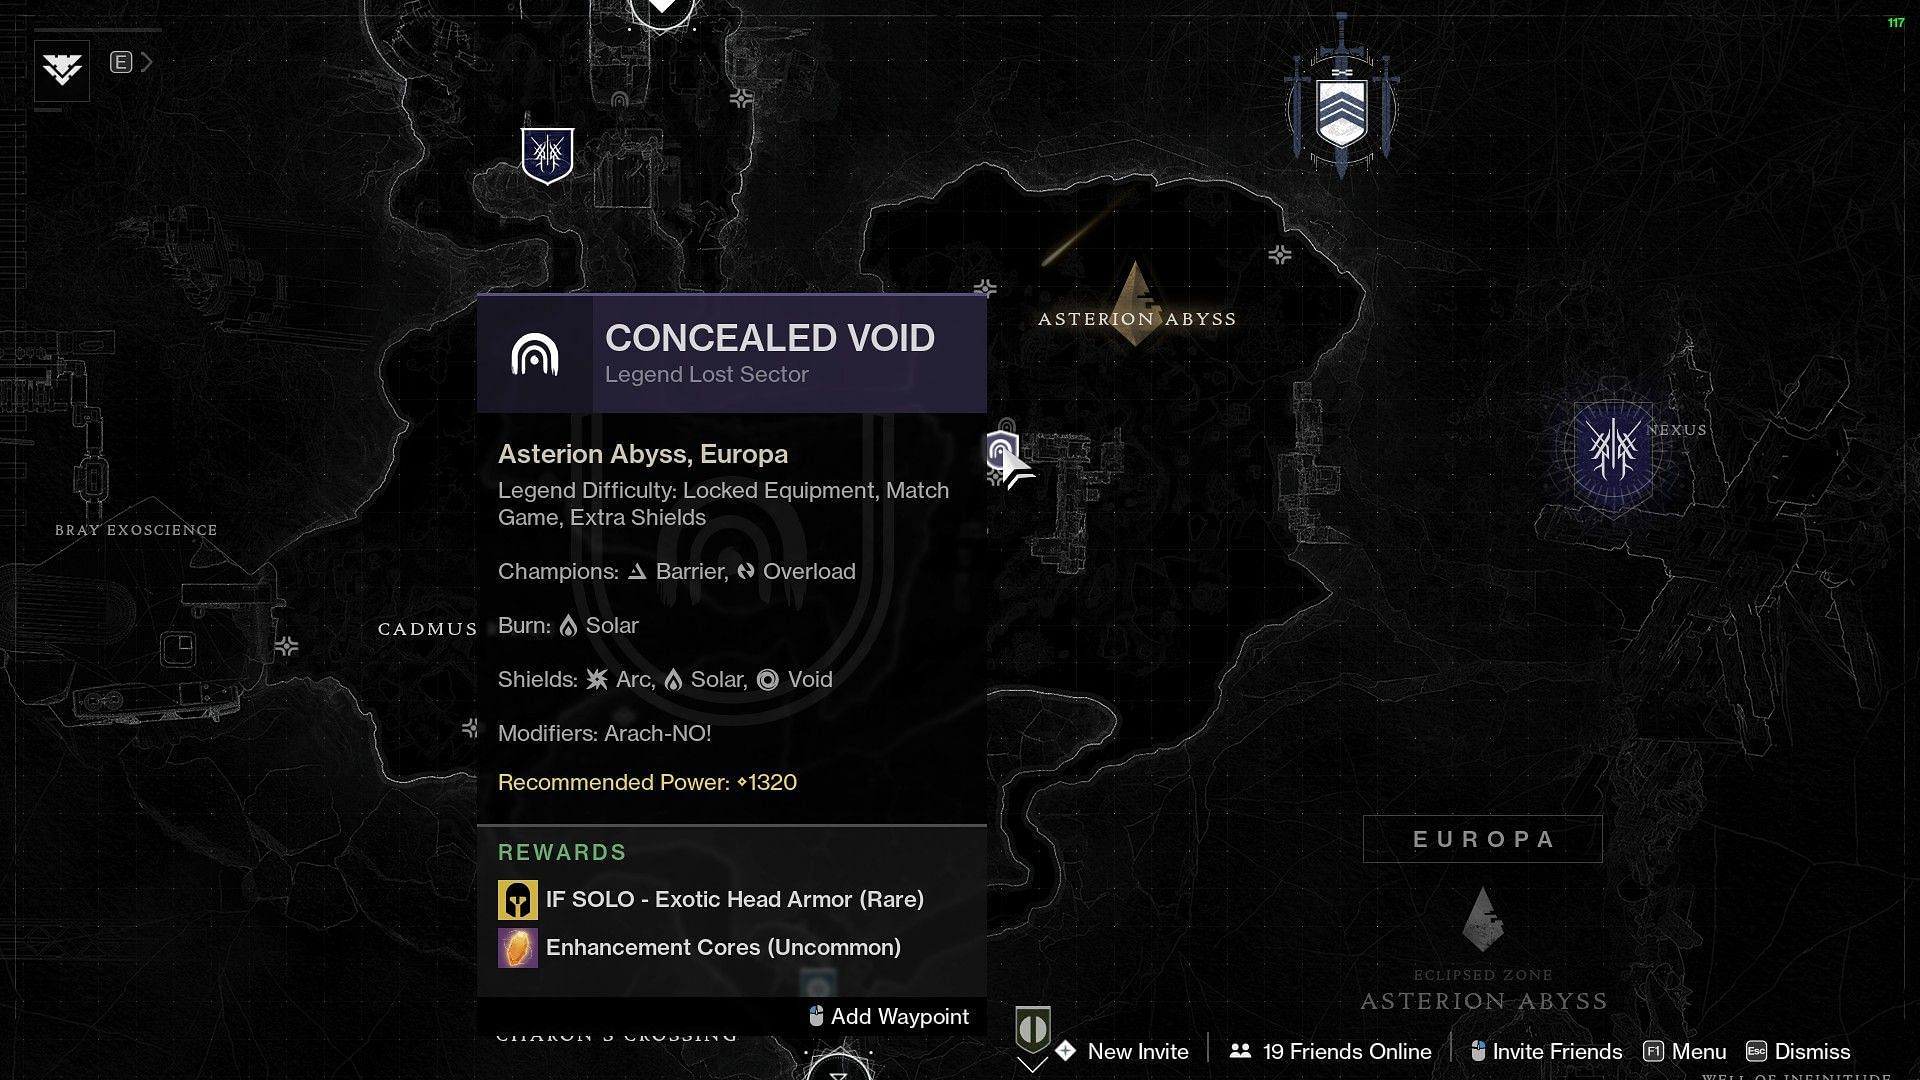 Concealed Void legend lost sector (Image via Bungie)